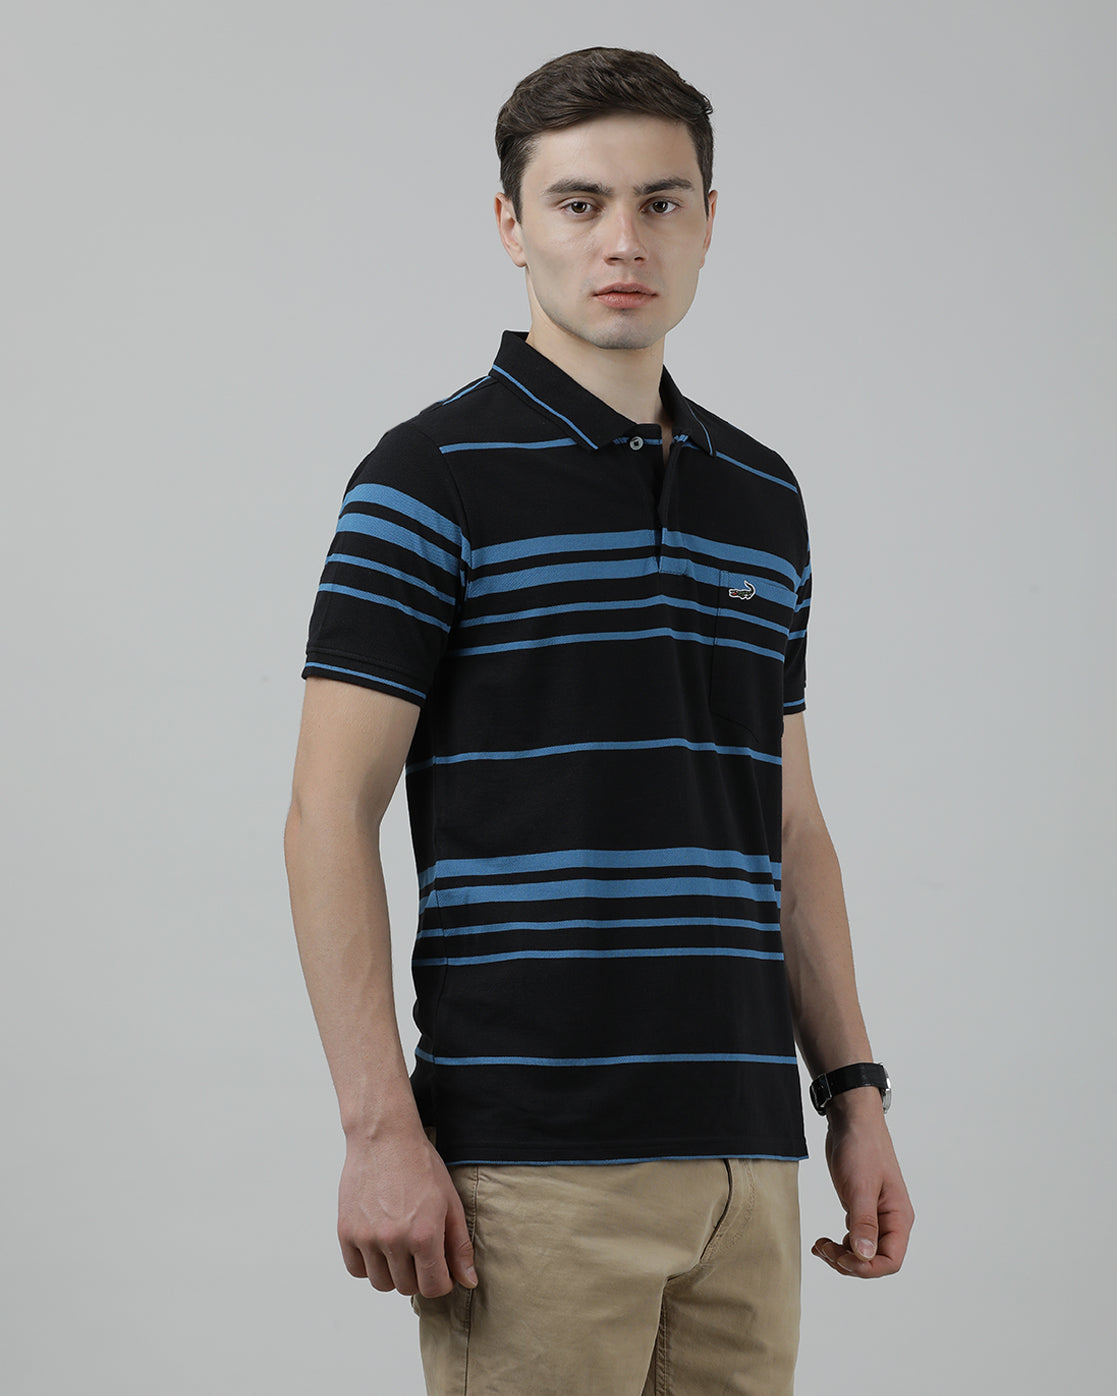 Casual Black T-Shirt Half Sleeve Slim Fit with Collar for Men